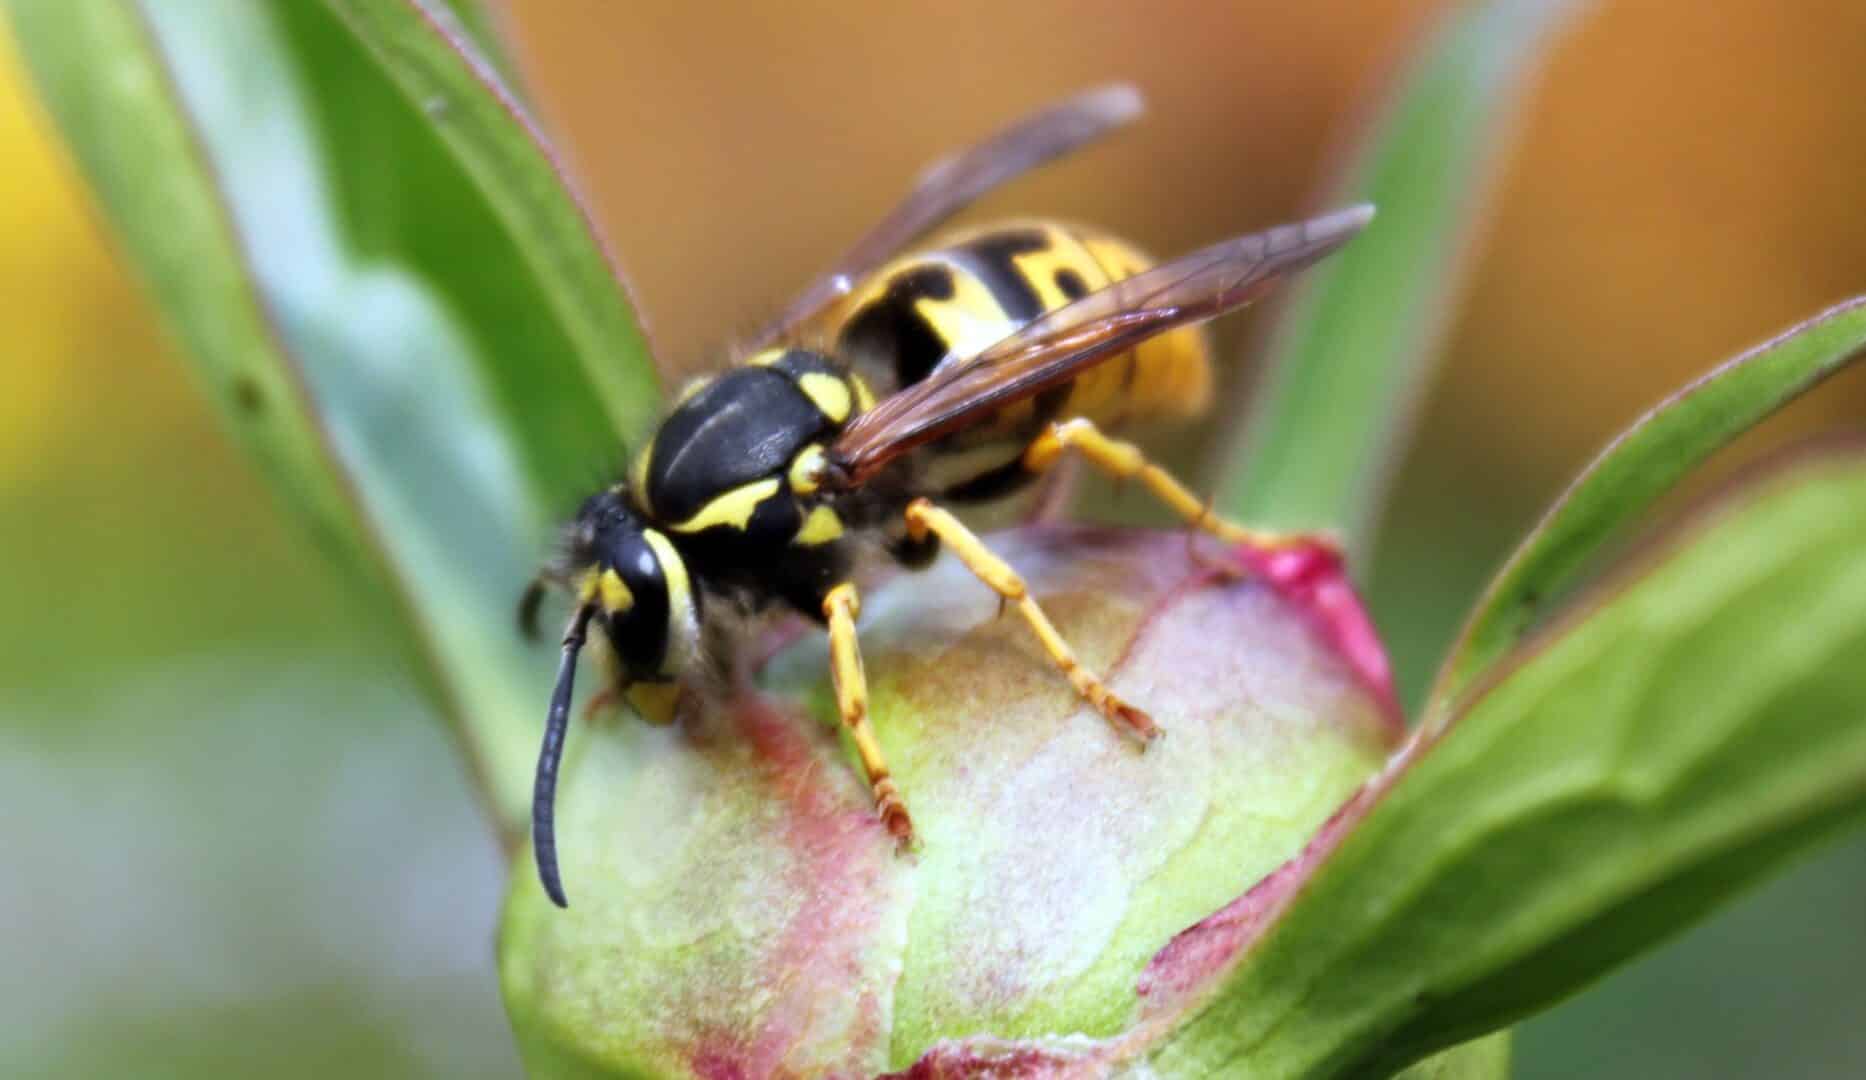 Wasp on a plant bud